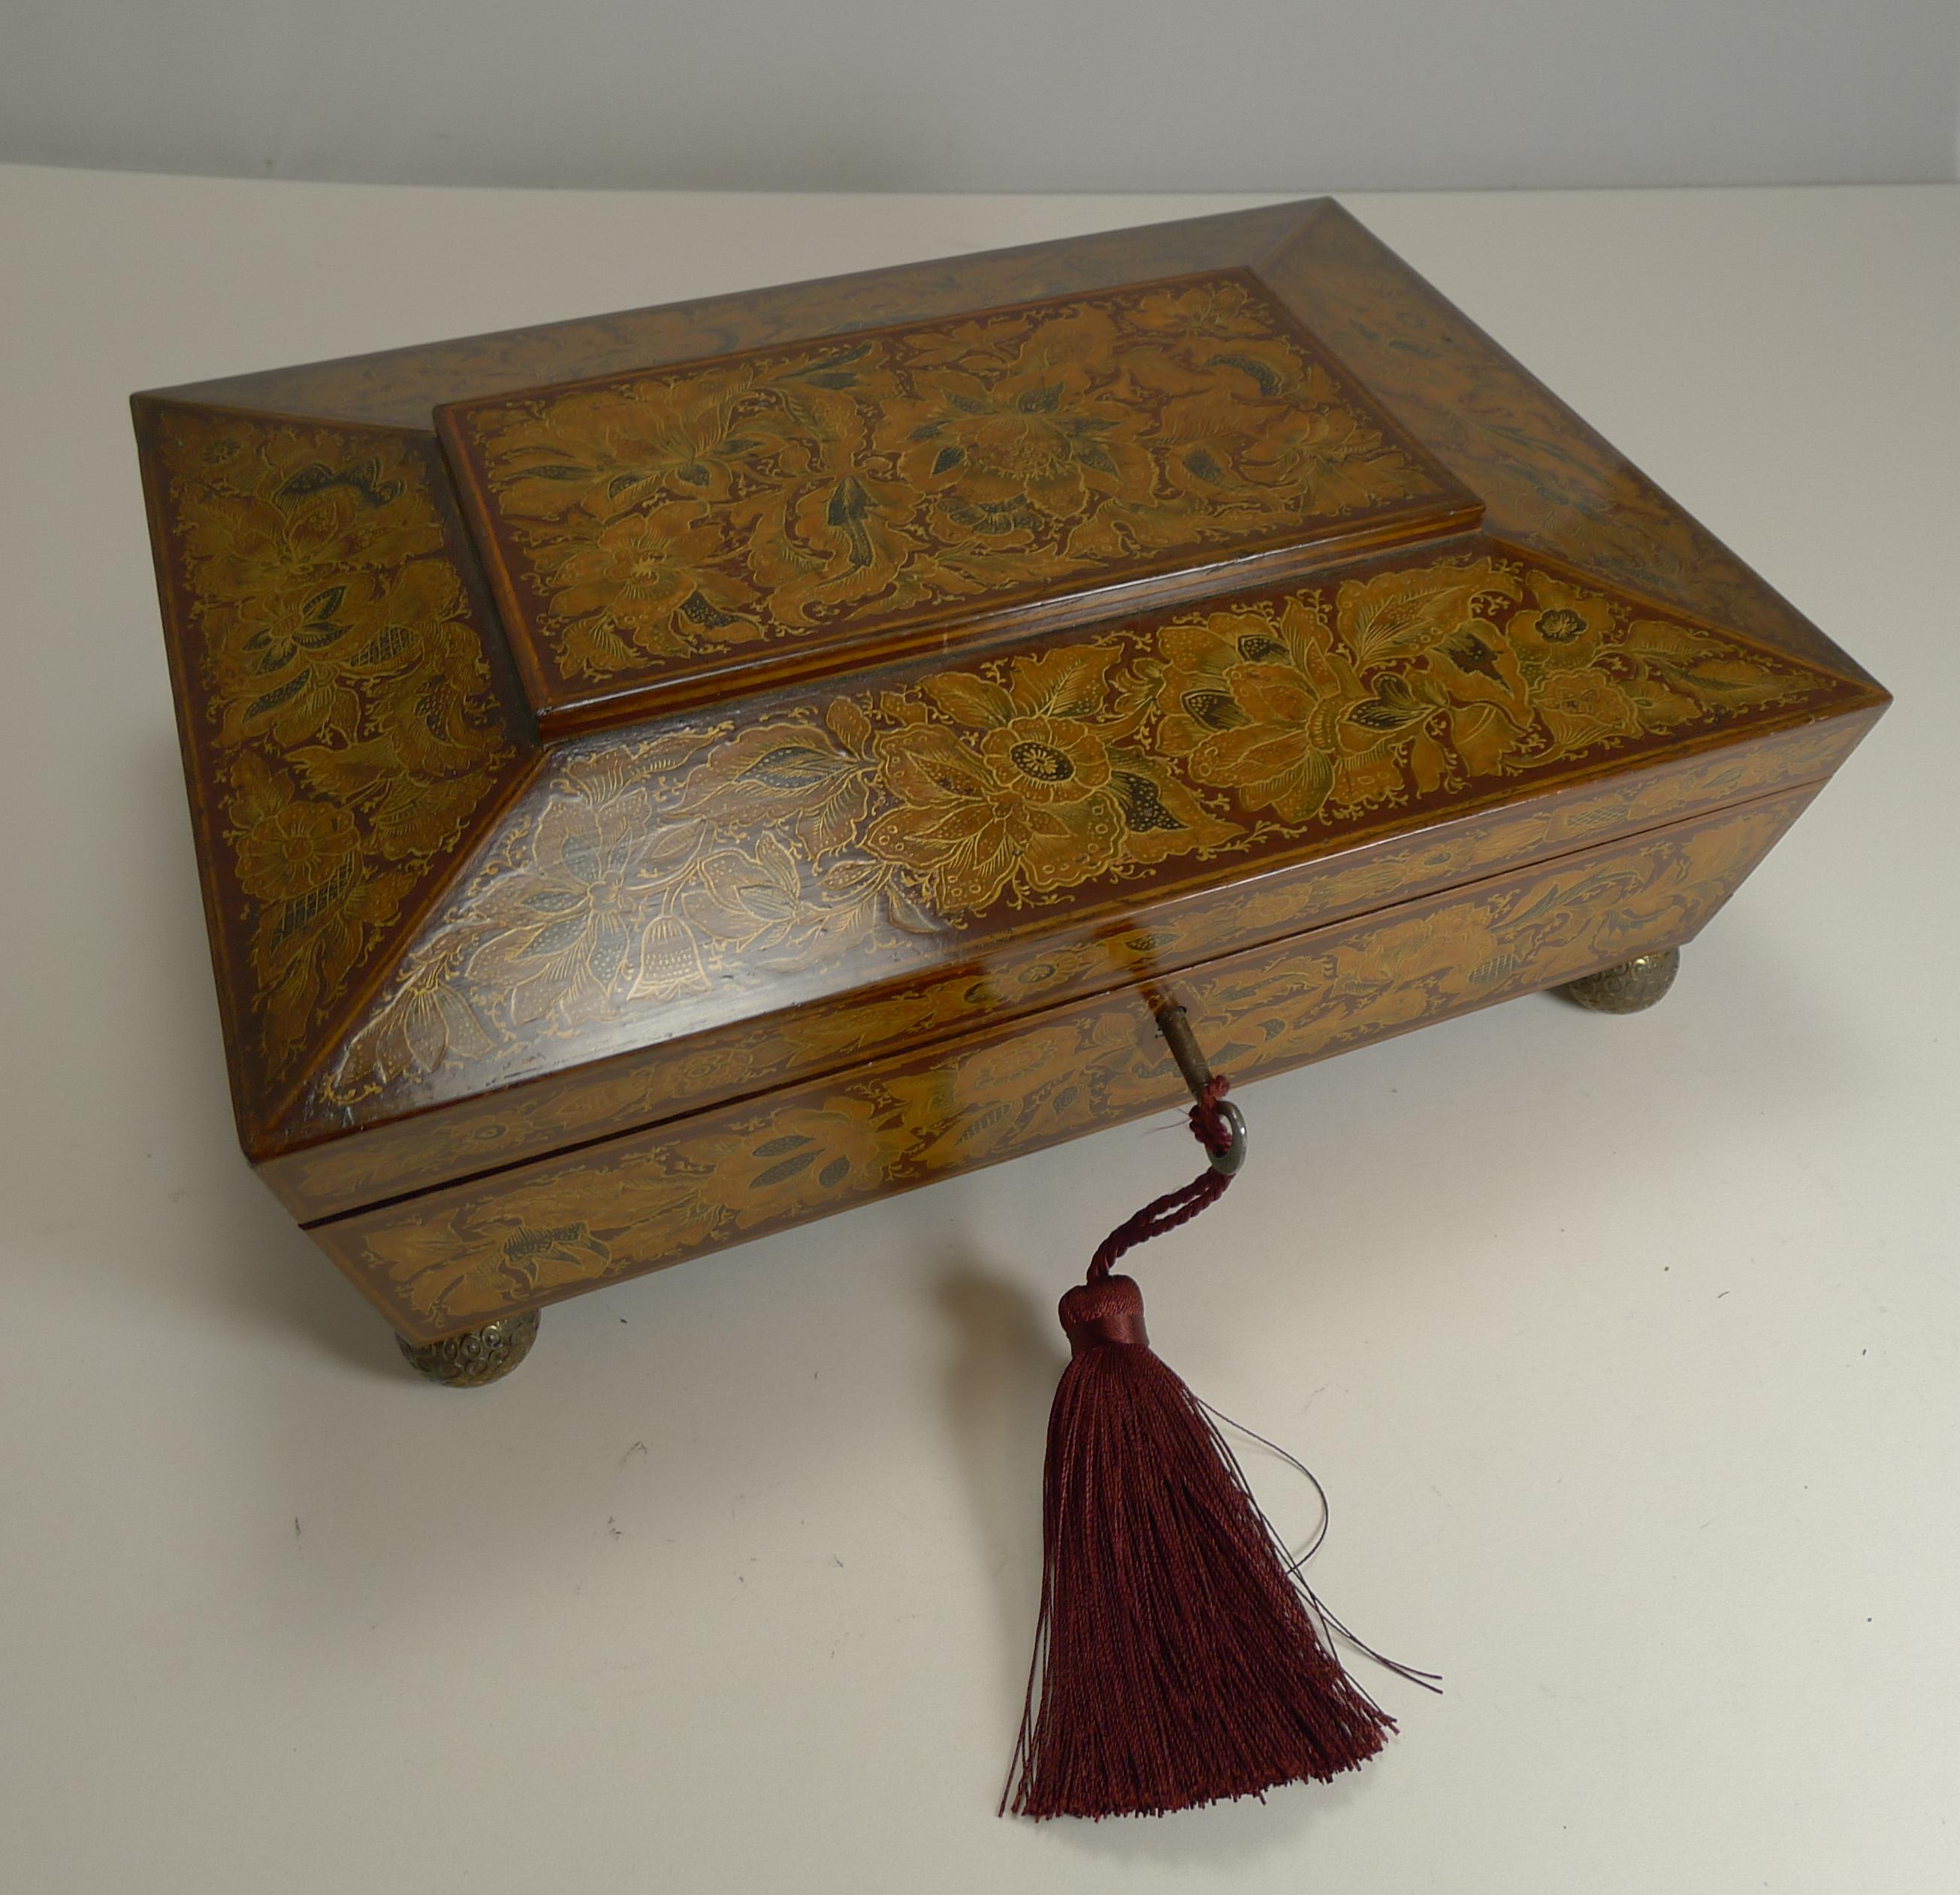 About as exotic and decorative as they get, this magnificent playing card or games box has a deep red or burgundy background which is smothered in the most exquisite fine penwork with plenty of gold creating an outstanding look. The box has been